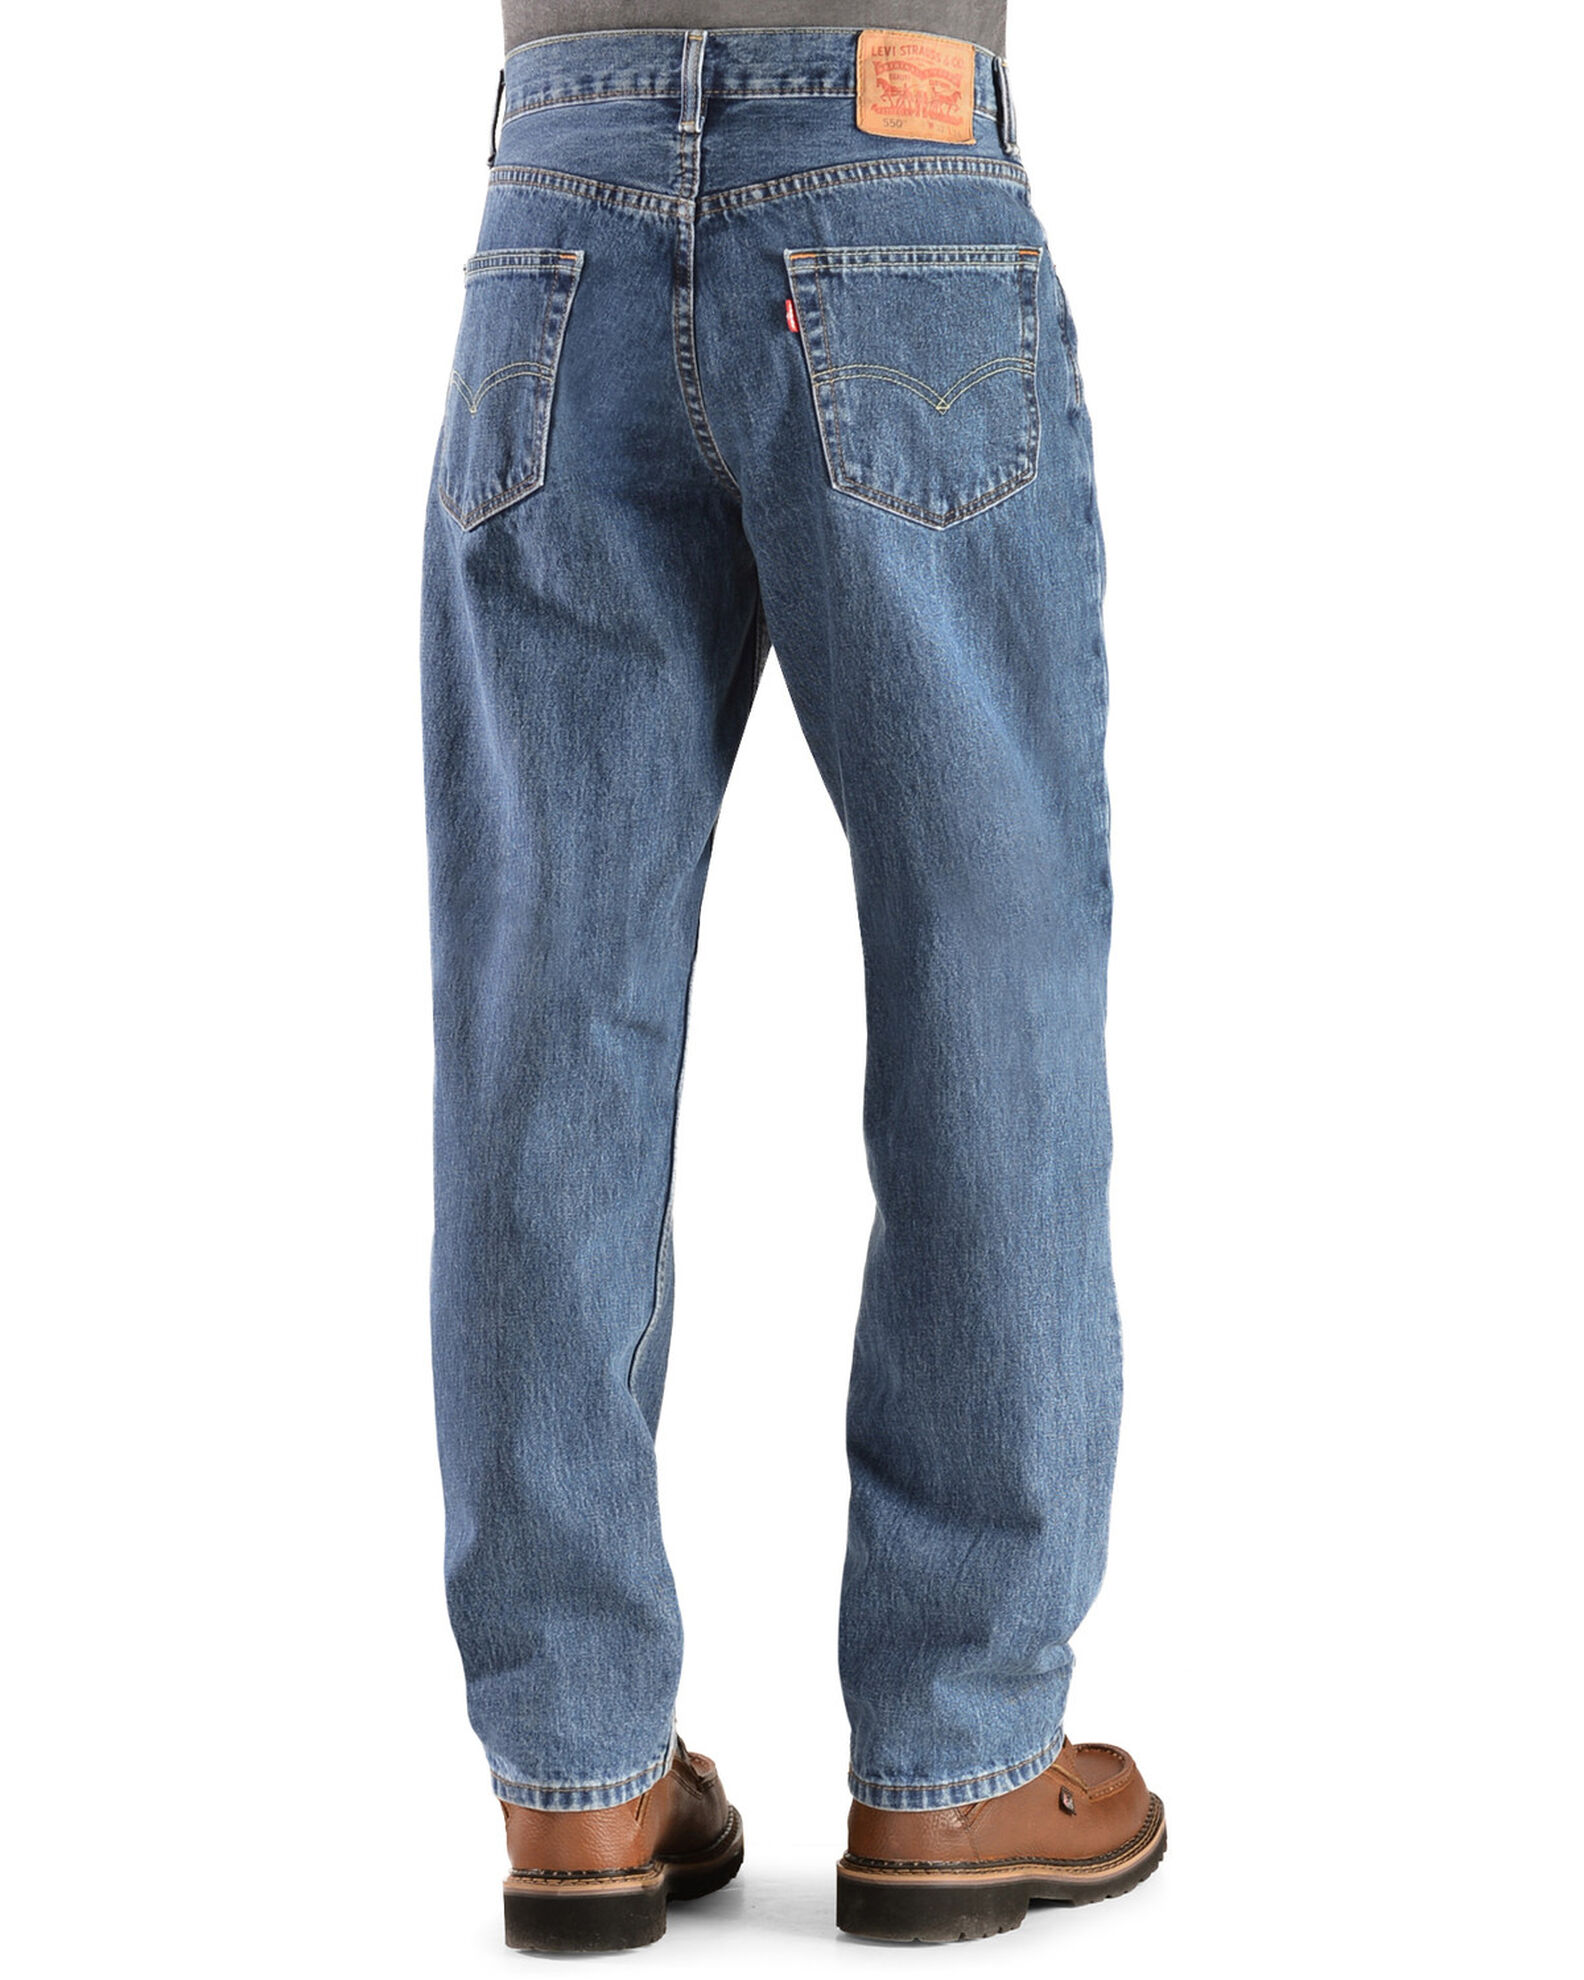 Levi's Men's 550 Prewashed Relaxed Tapered Leg Jeans | Boot Barn